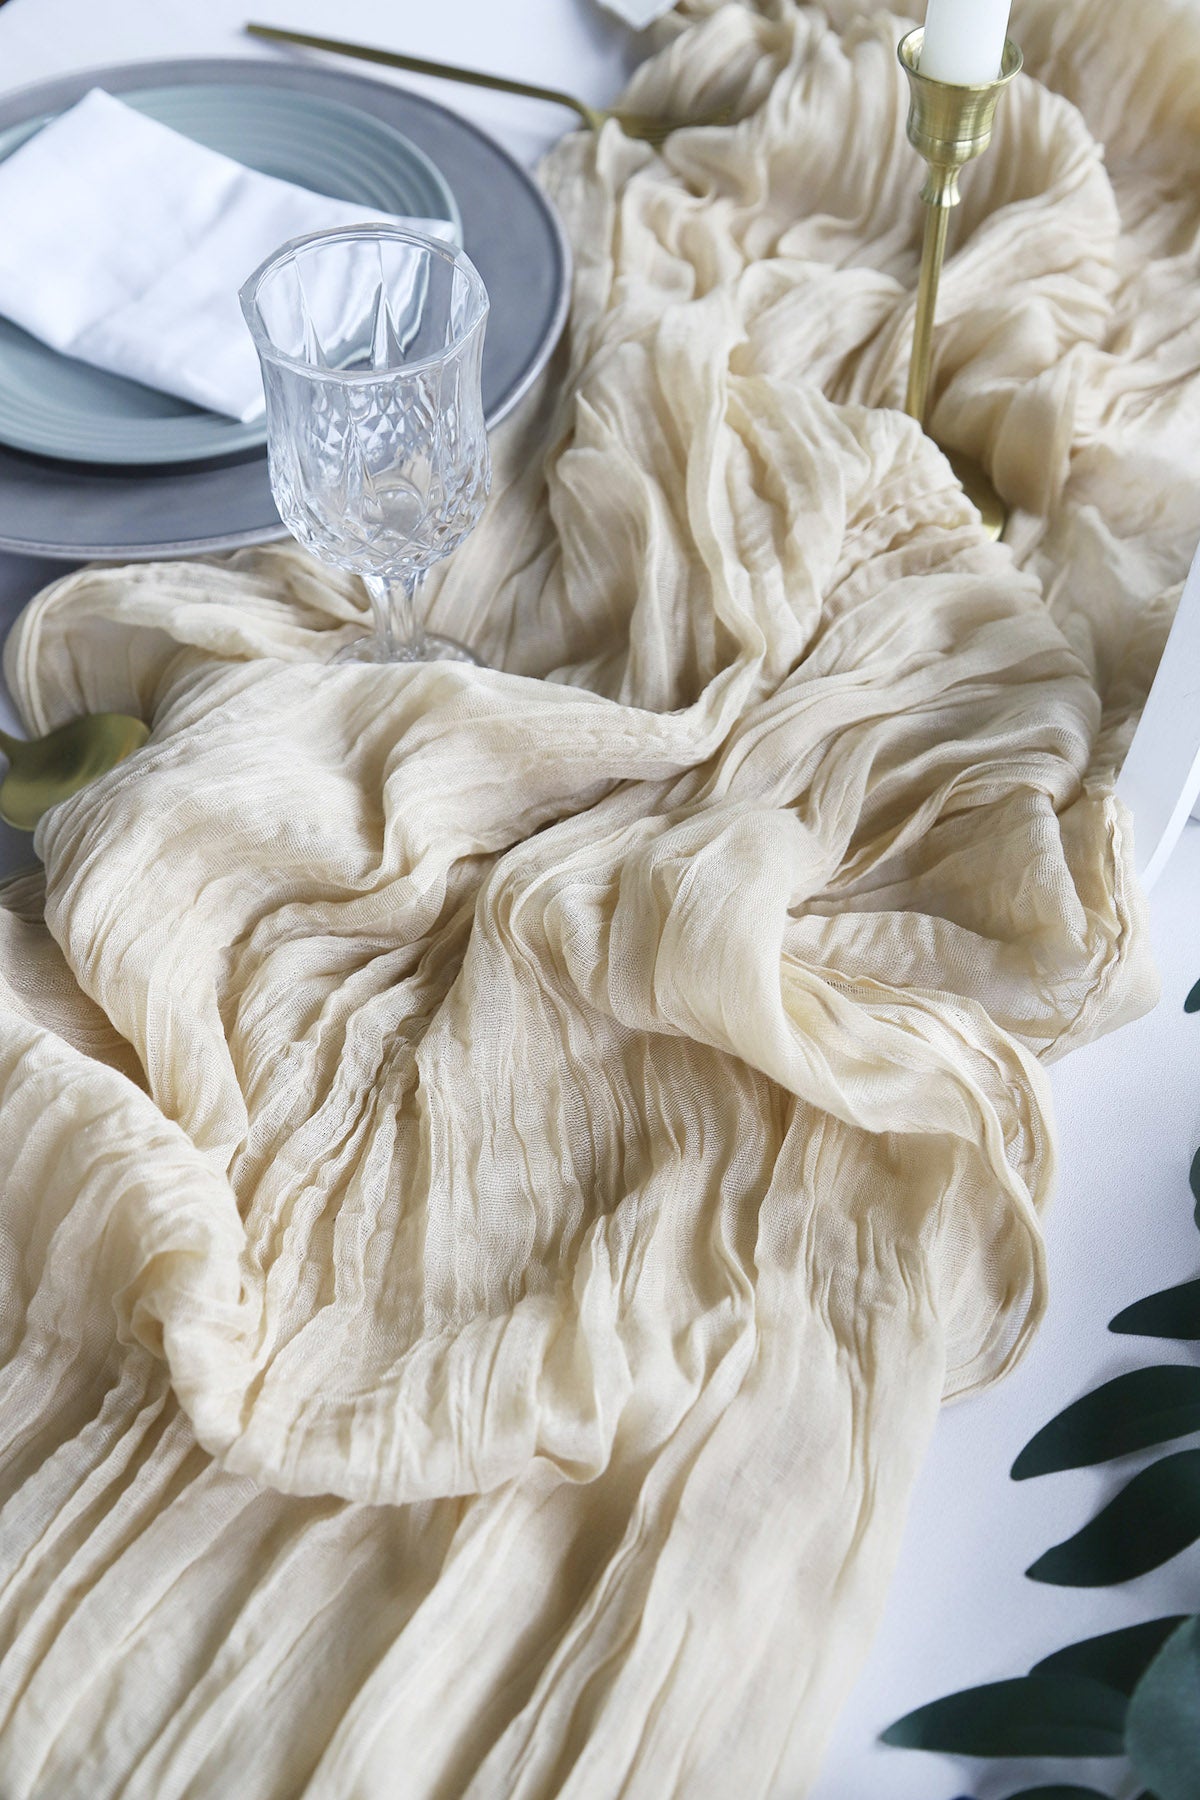 2 Pcs Cheesecloth Table Runner - Sand